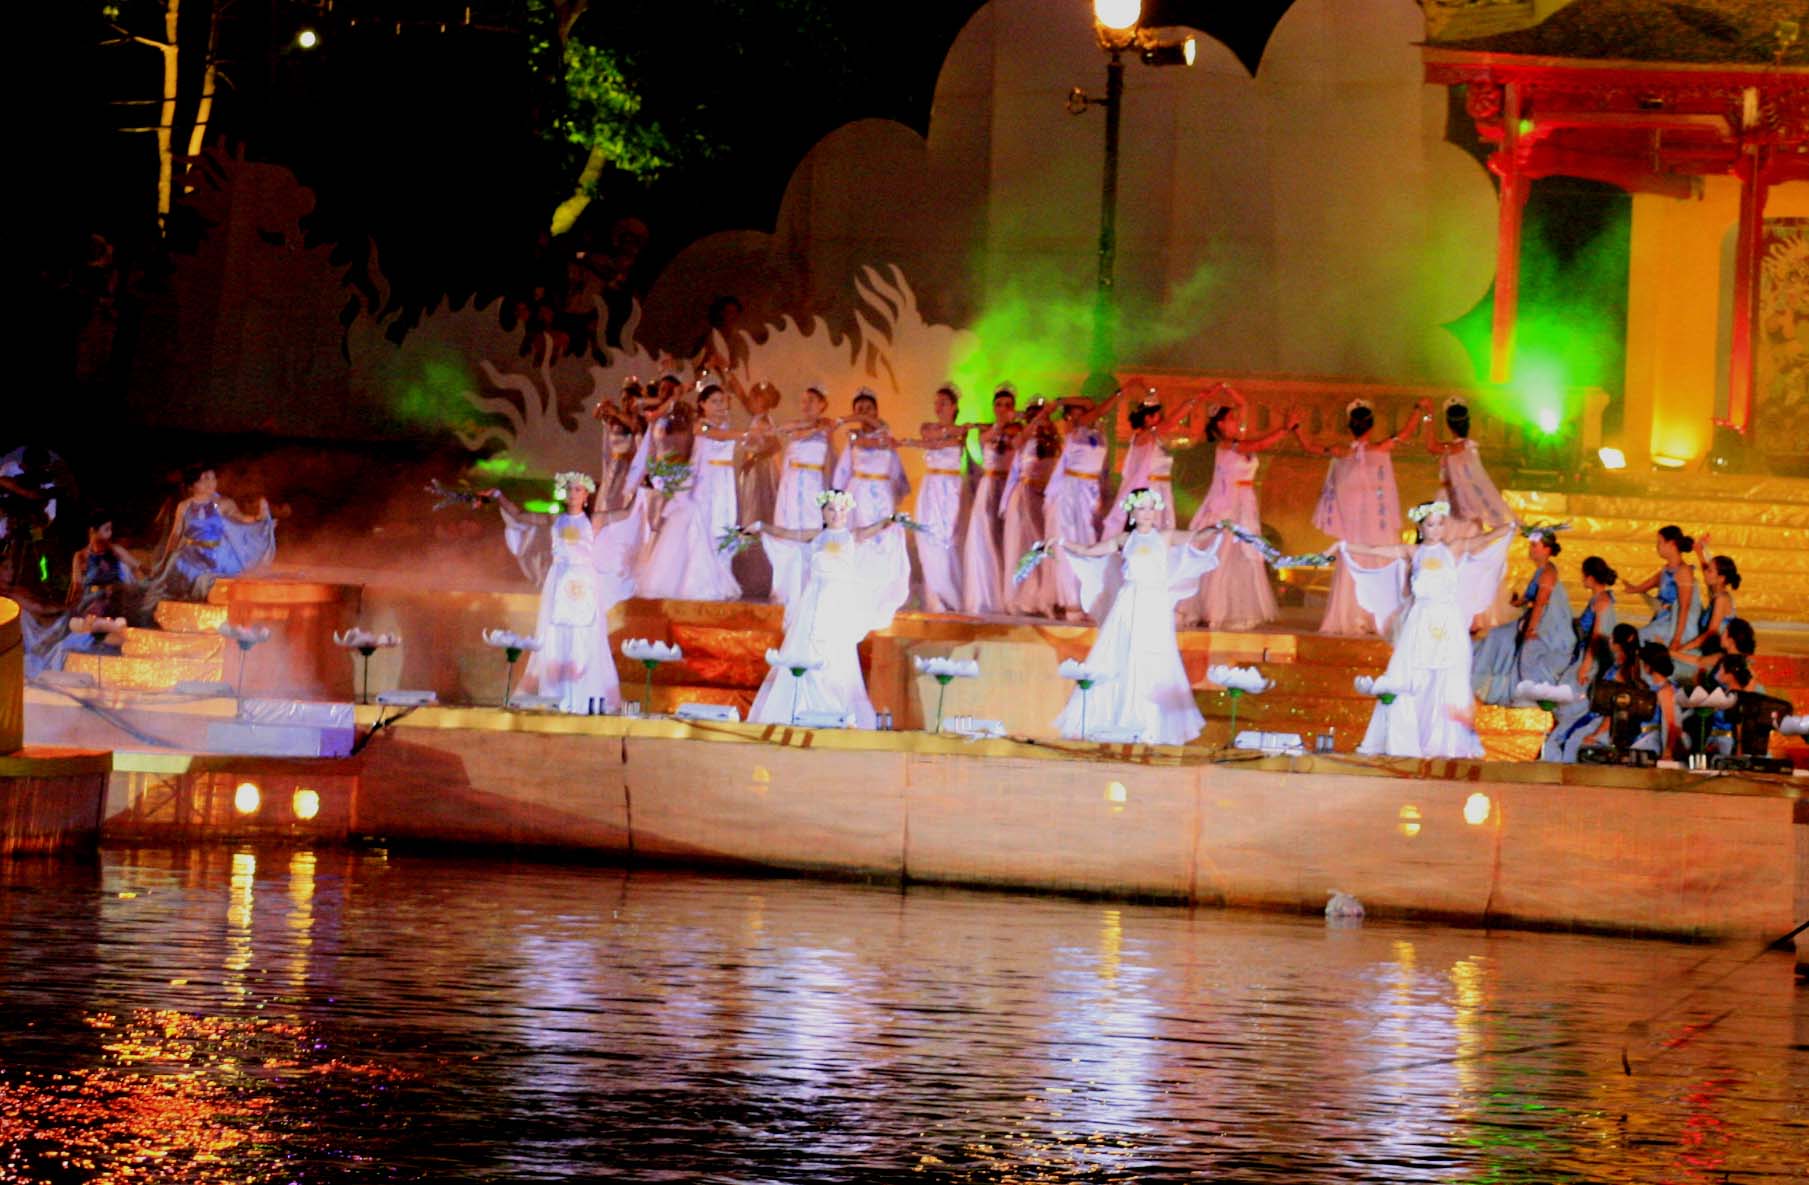 37 countries to join 2014 Hue Festival